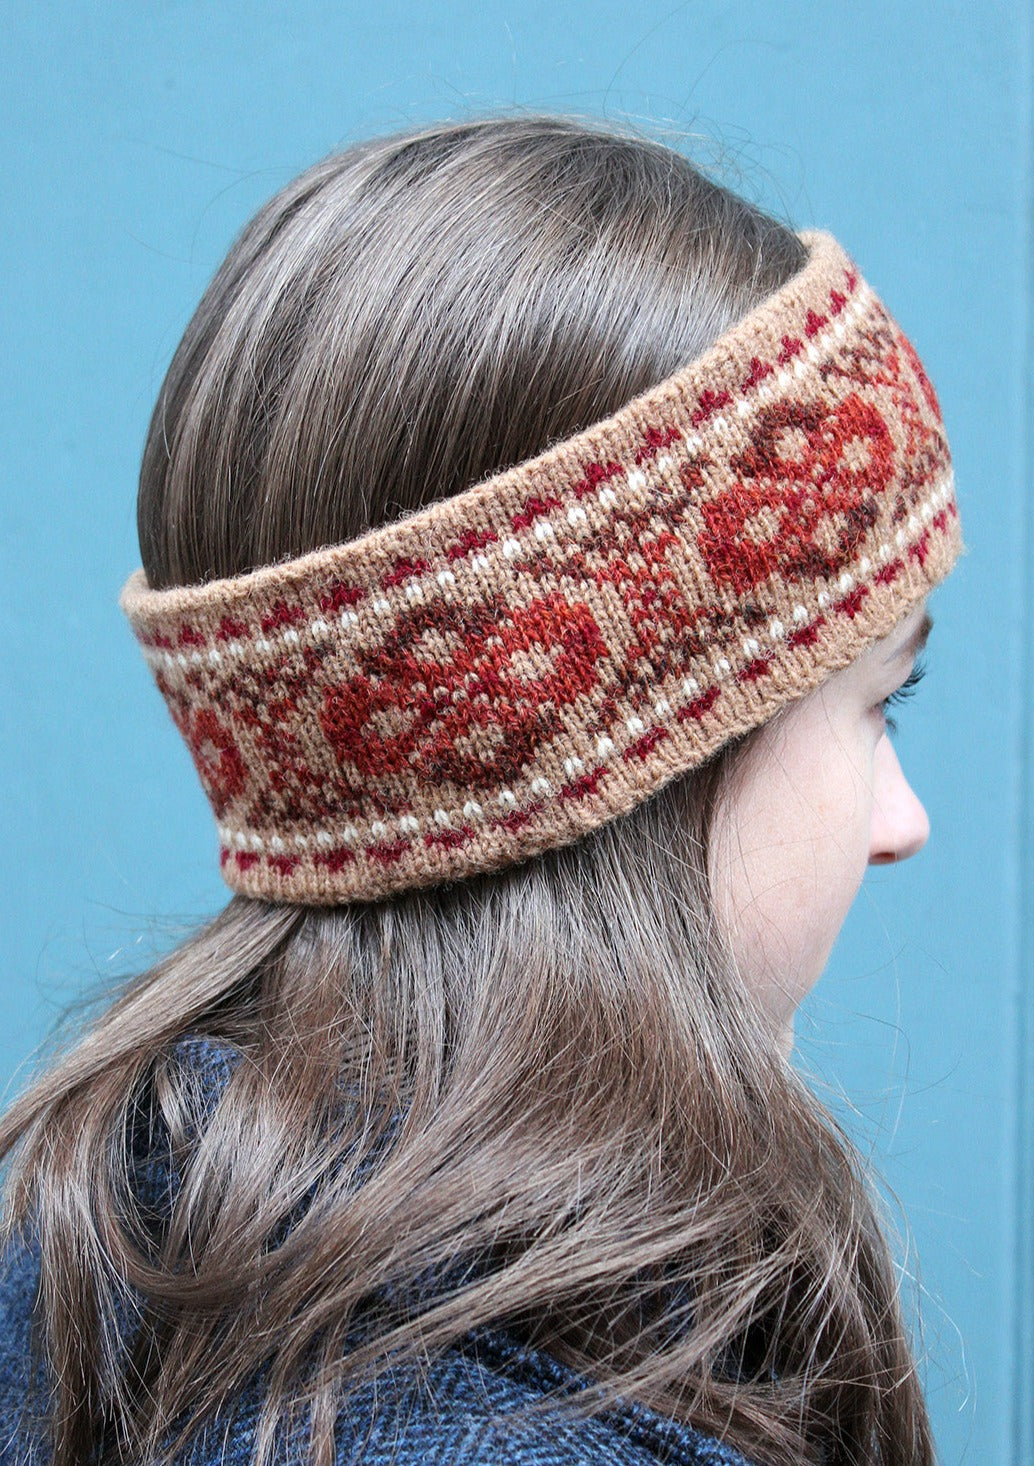 Hand knitted Fair Isle headband in shades of camel and red, made exclusively for the Scottish Textiles Showcase.